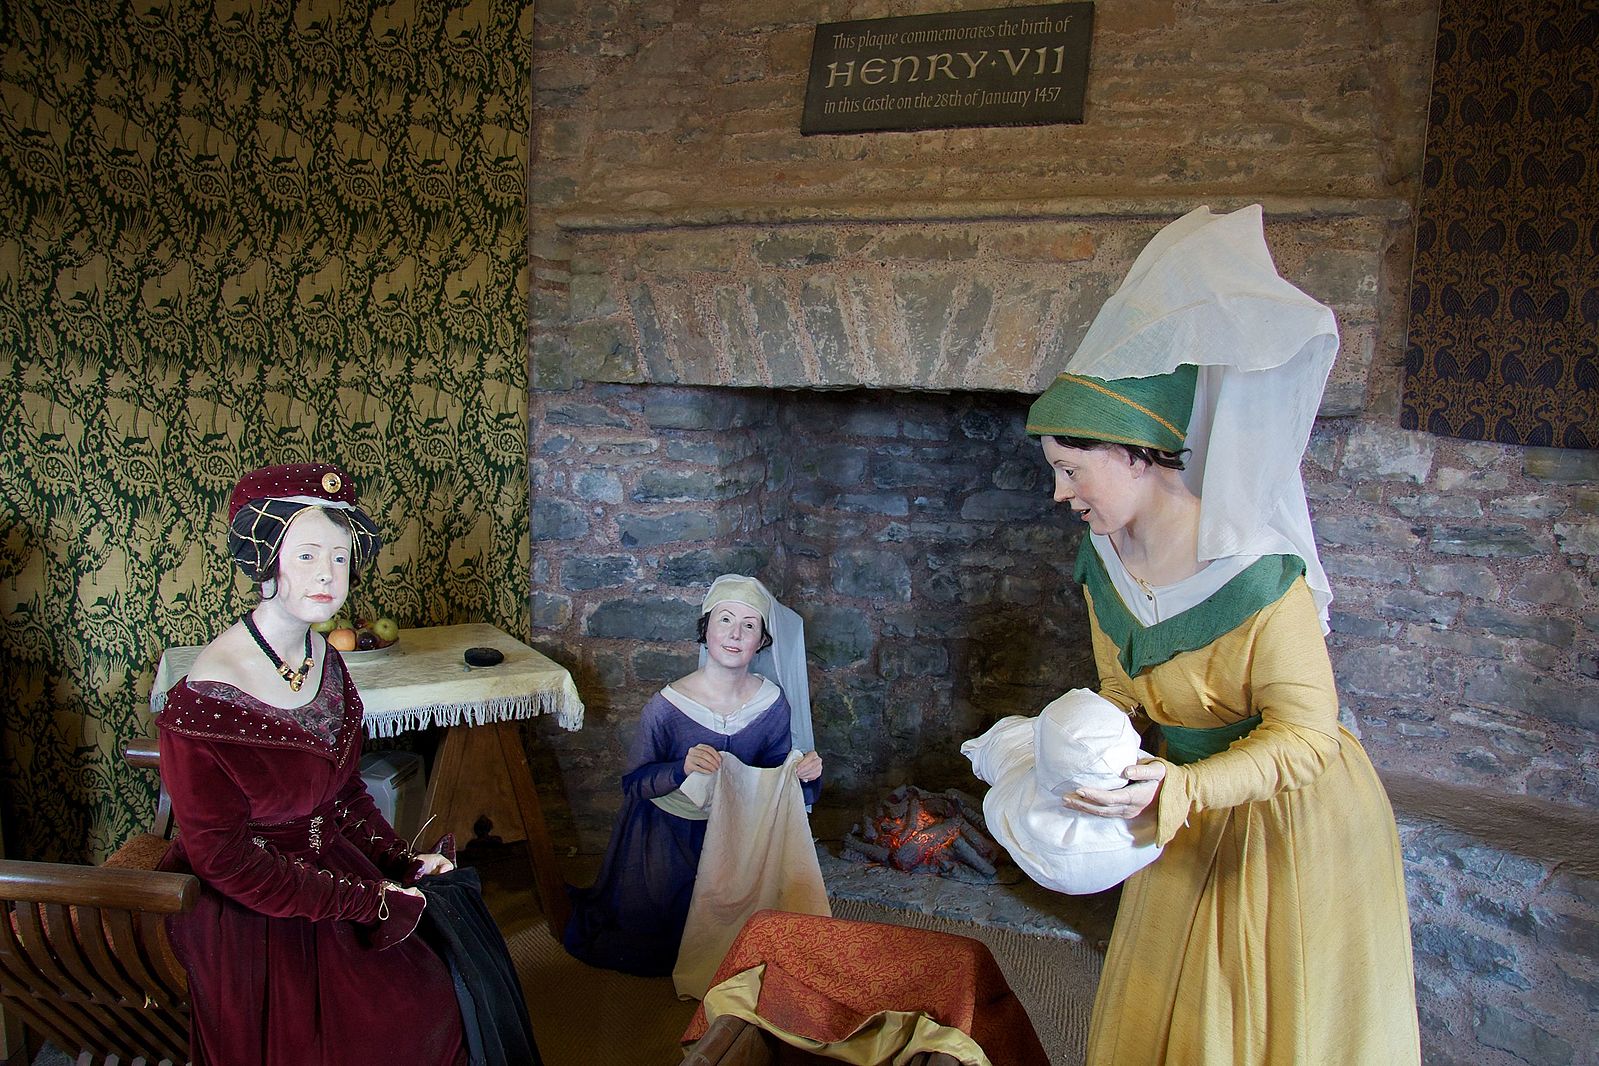 Wax figure display at Pembroke Castle, Wales, depicting Lady Margaret Beaufort, her infant son, the future Henry VII, and two attendants.